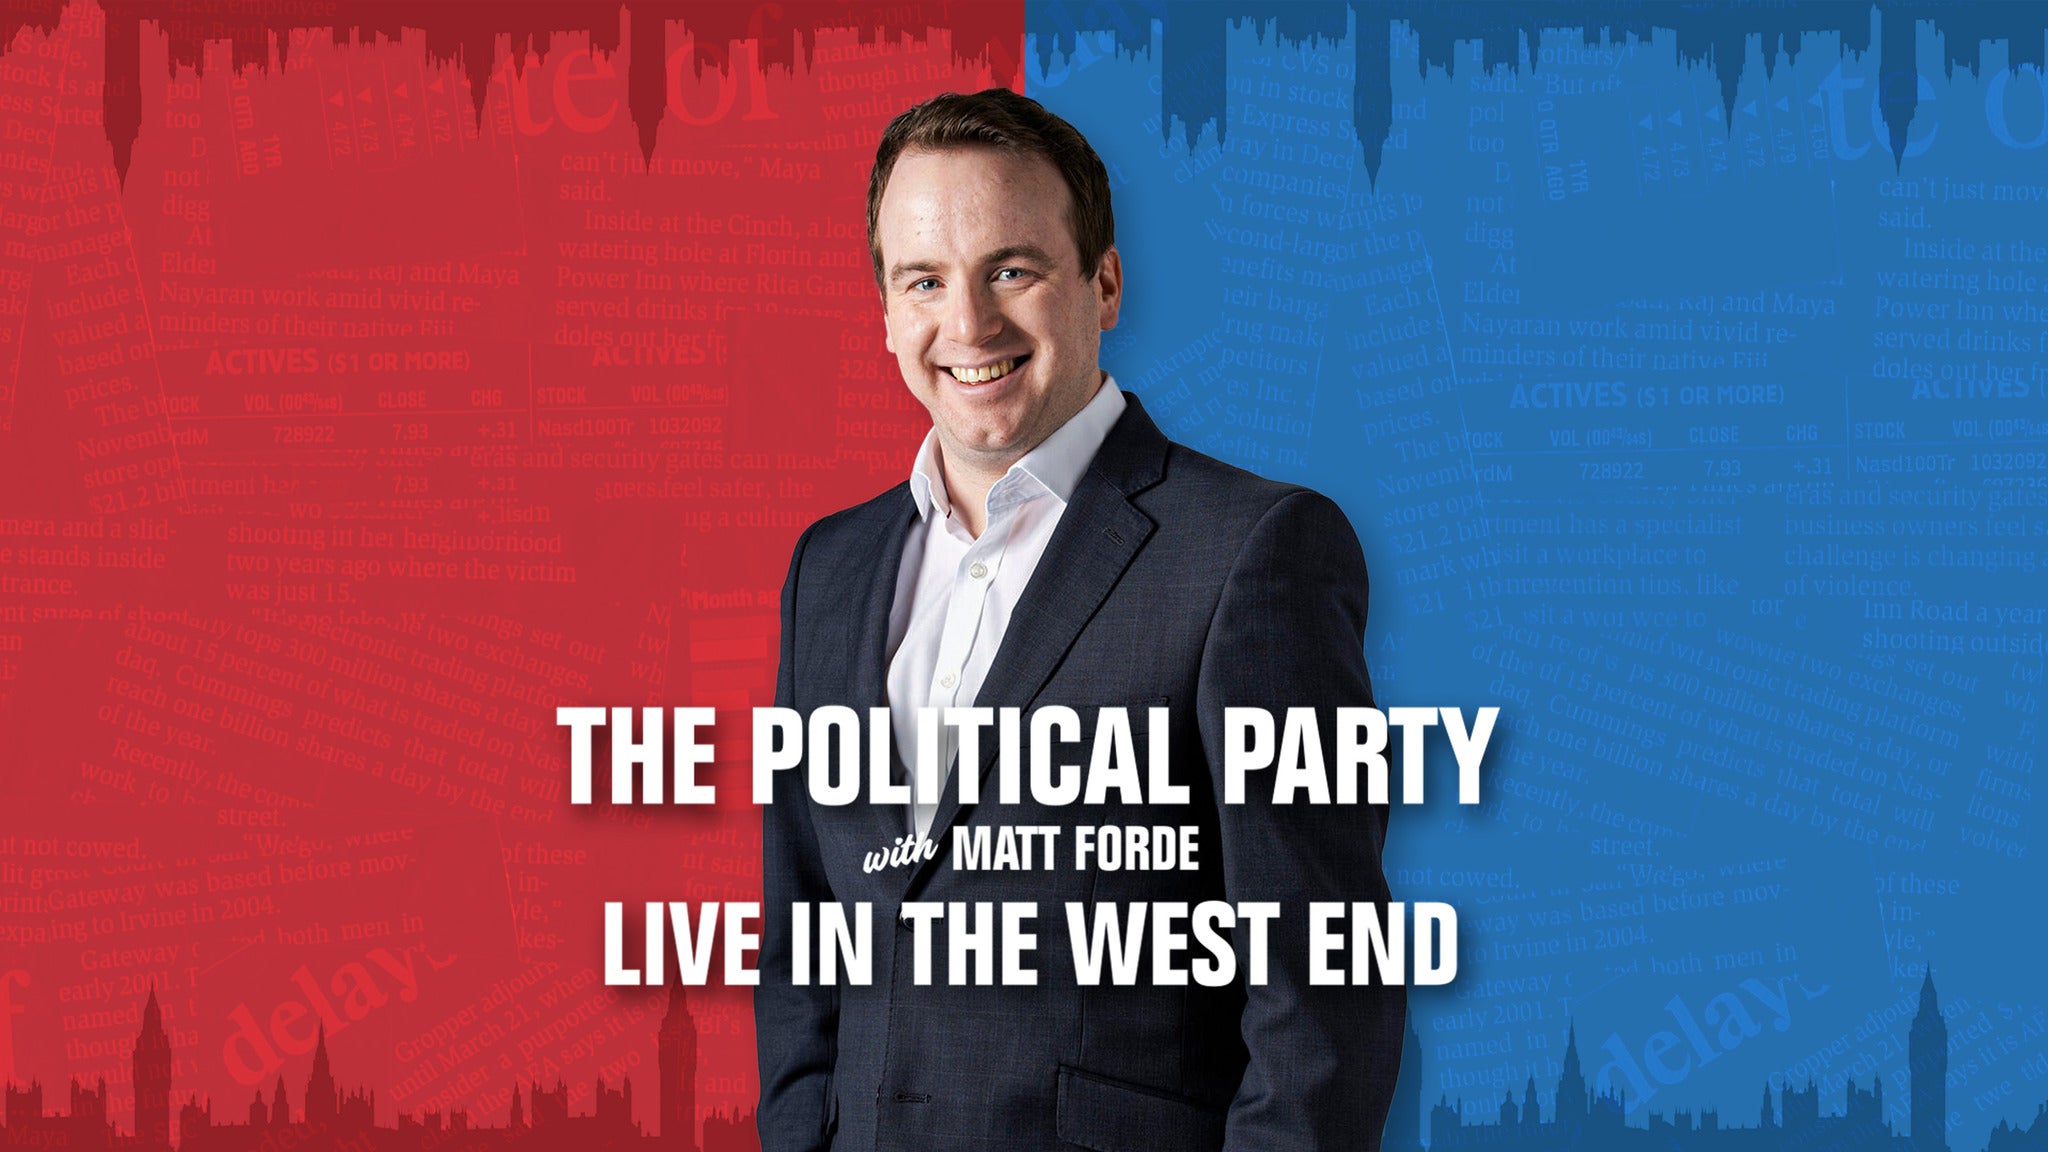 The Political Party with Matt Forde Event Title Pic